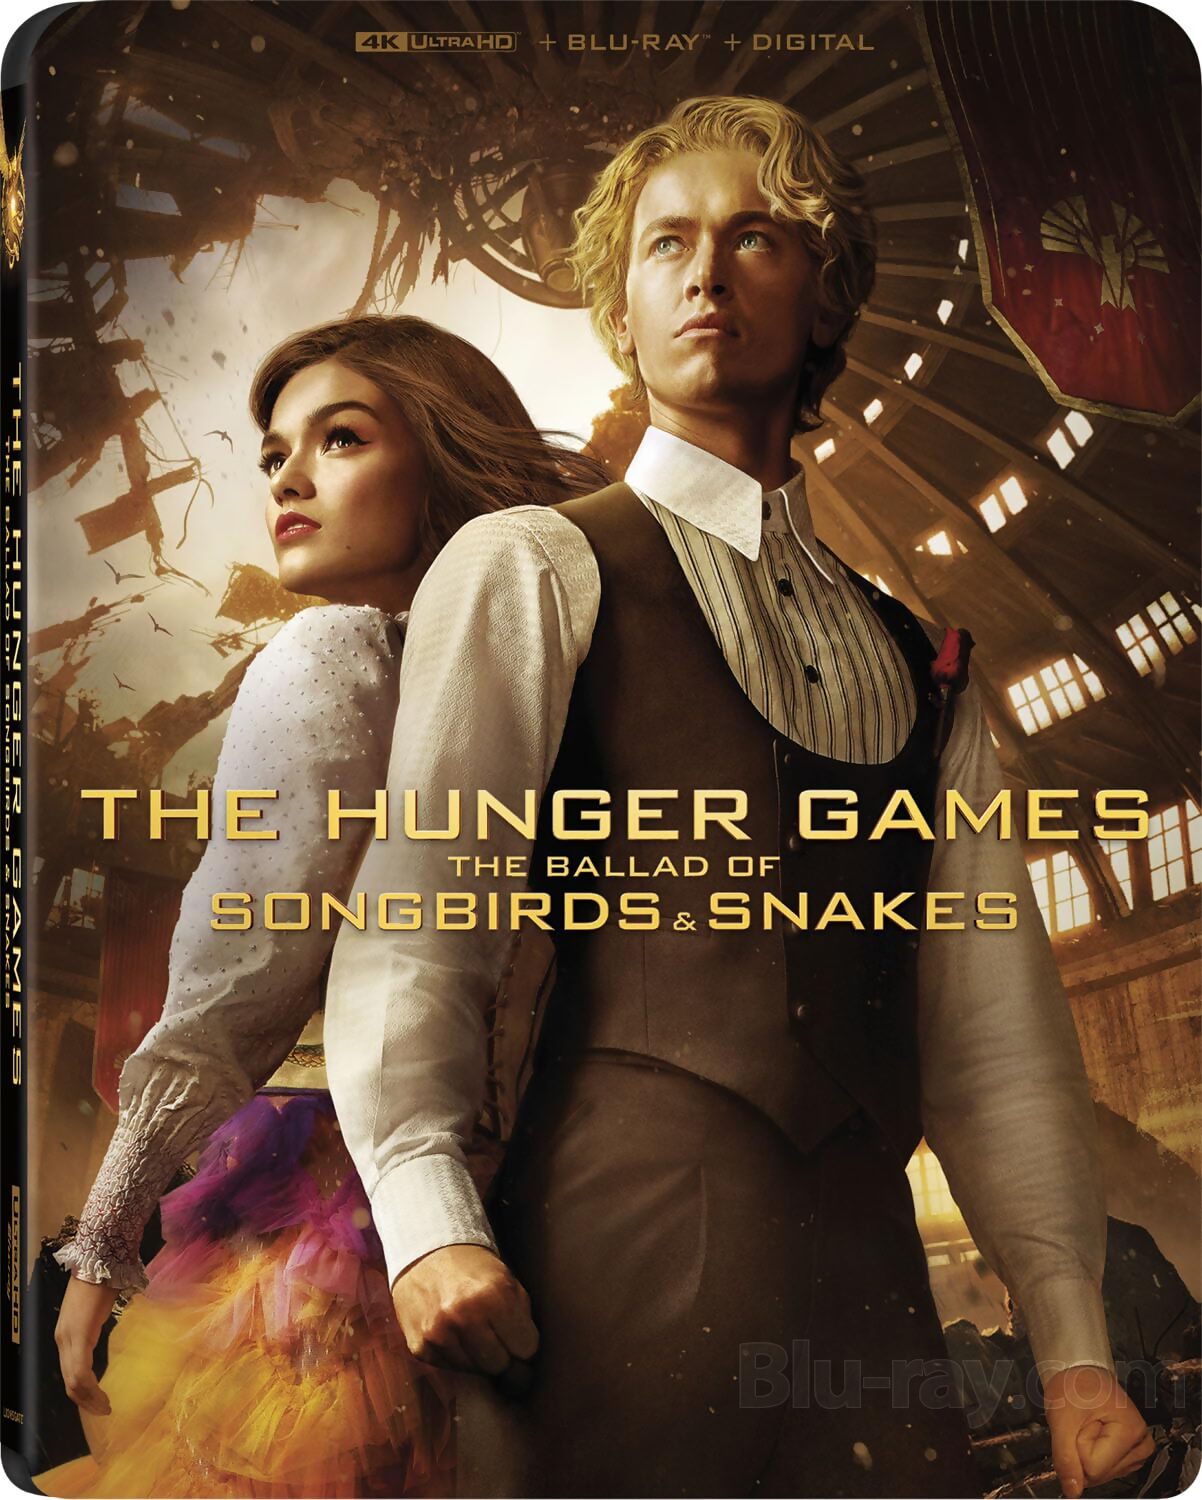 The Hunger Games: The Ballad of Songbirds and Snakes 4K UHD + Blu-ray with Slipcover (Lionsgate U.S.)